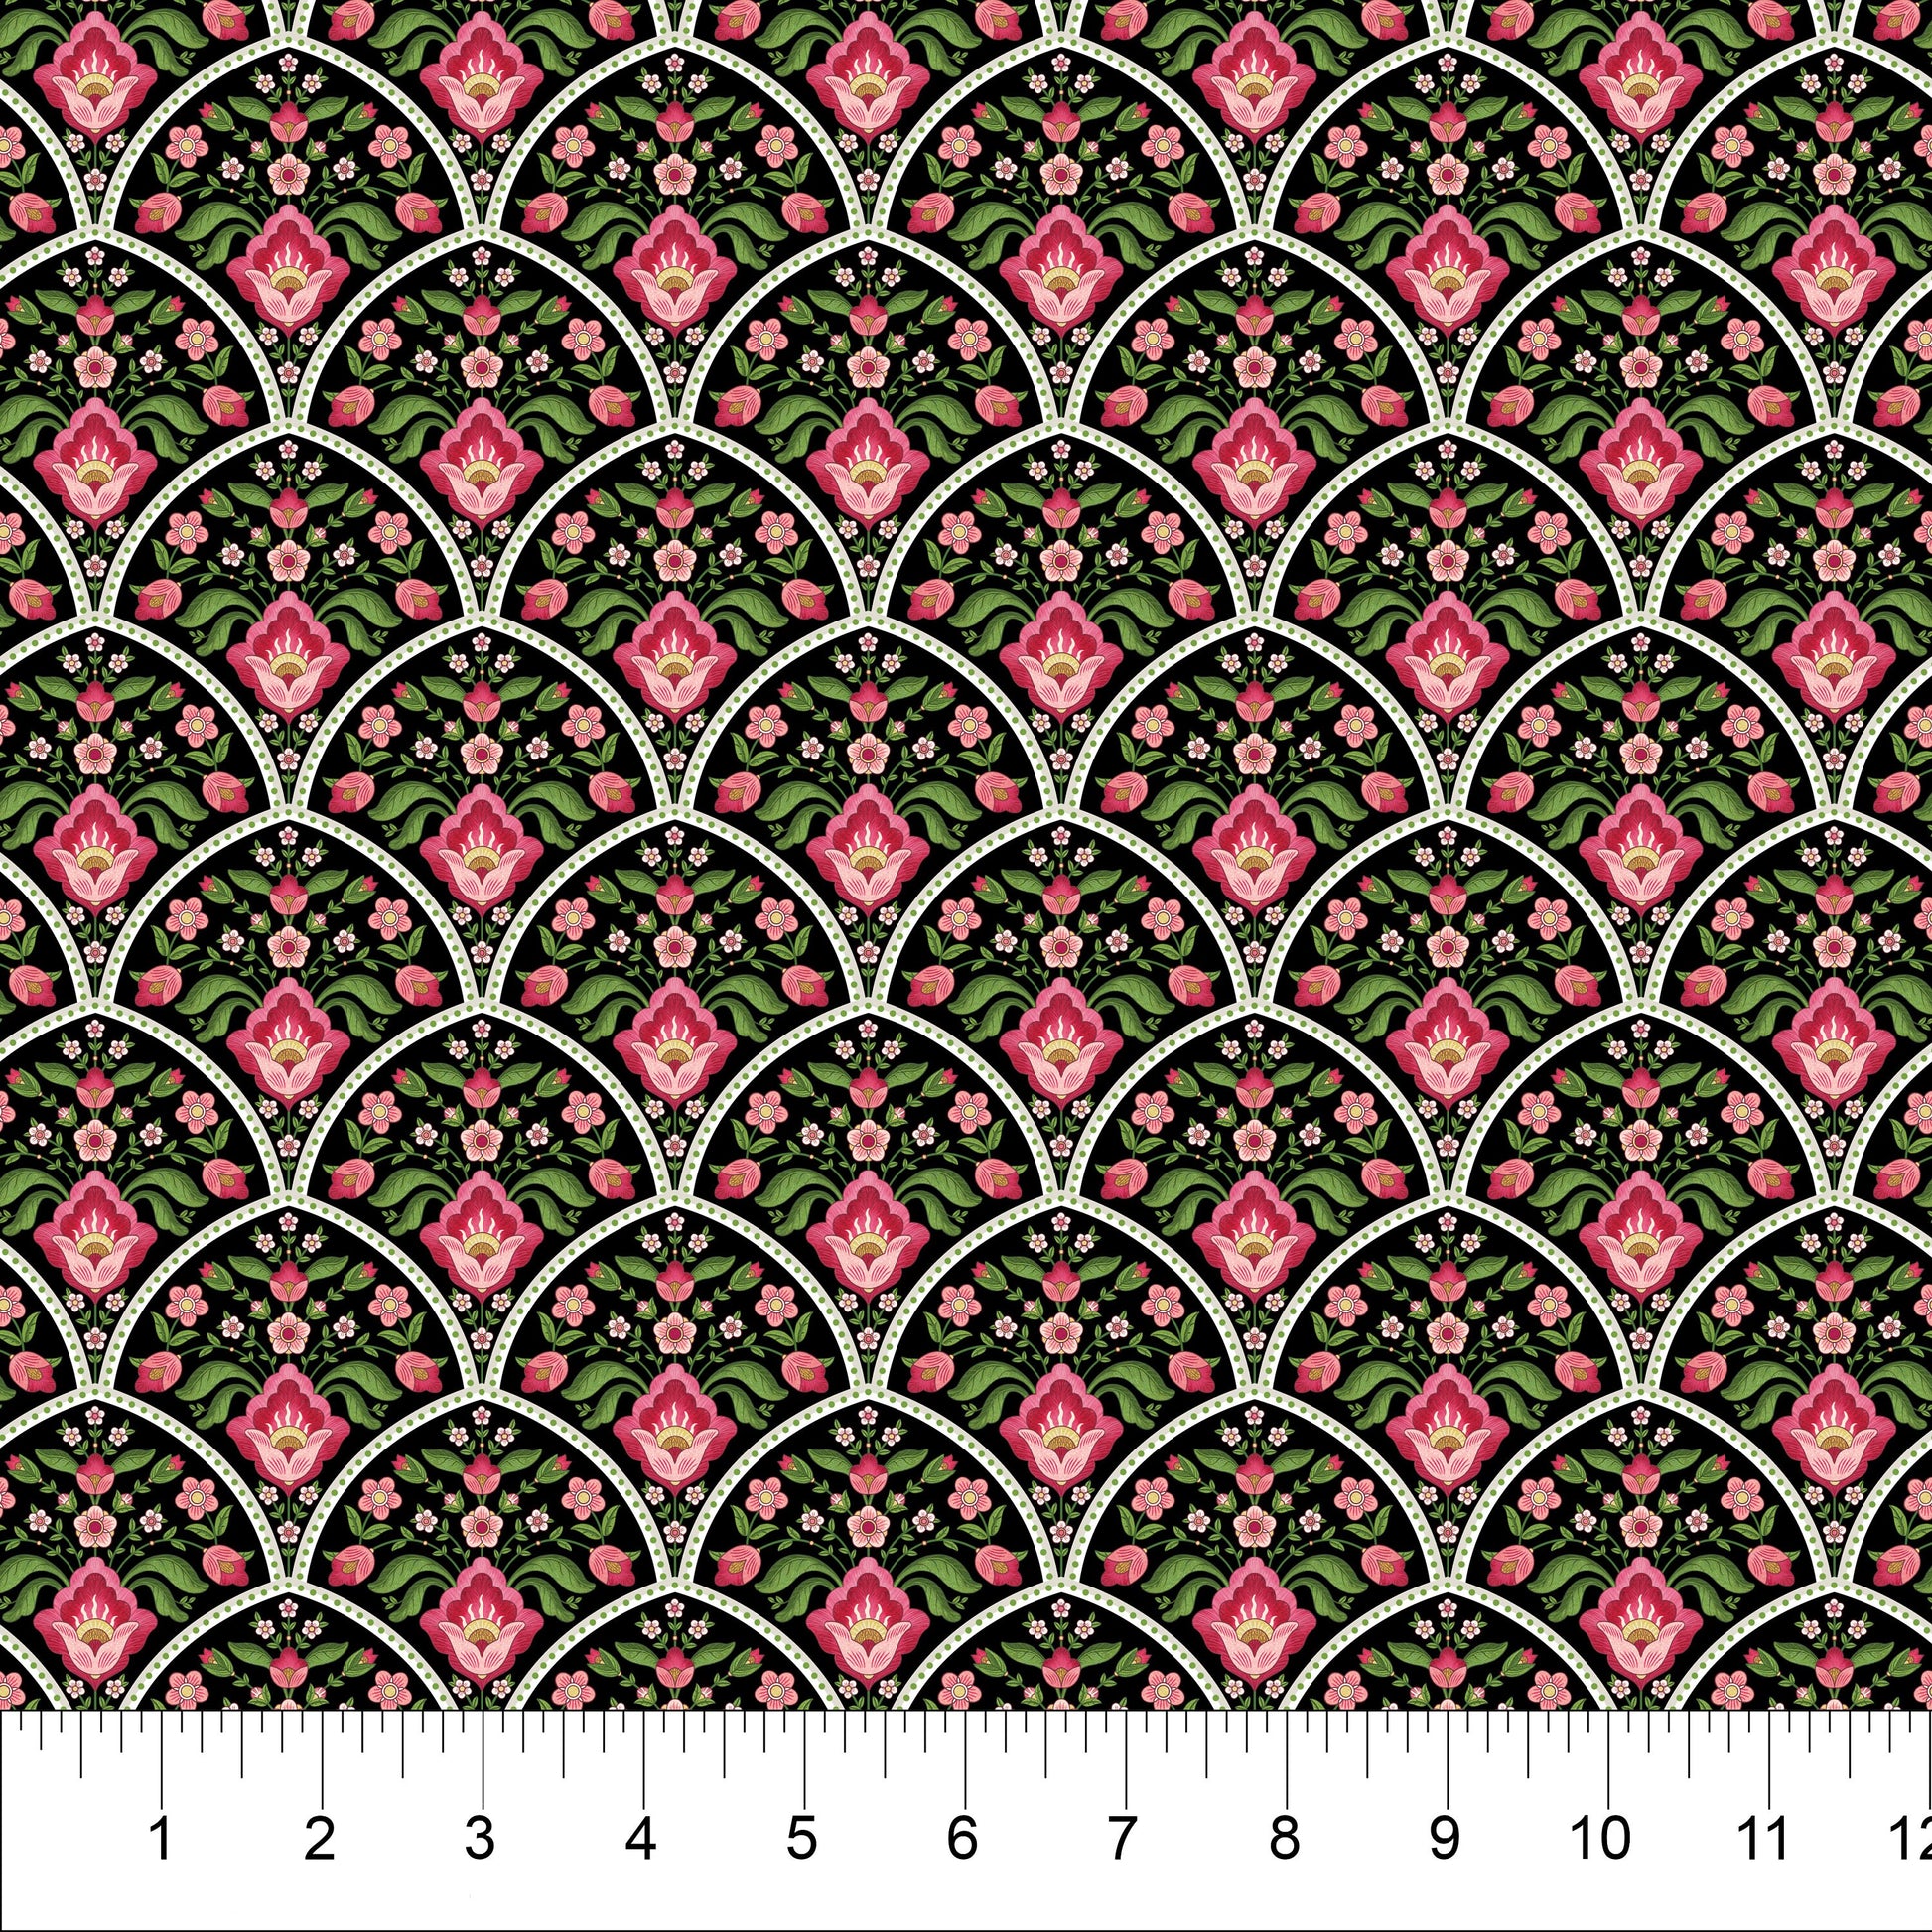 Bloom 15 Piece Fat Quarter Bundle, Northcott FQBLOOM15-10, Black Pink Green White Floral Cotton Quilt Fabric, 18 x 22 Fabric Cuts